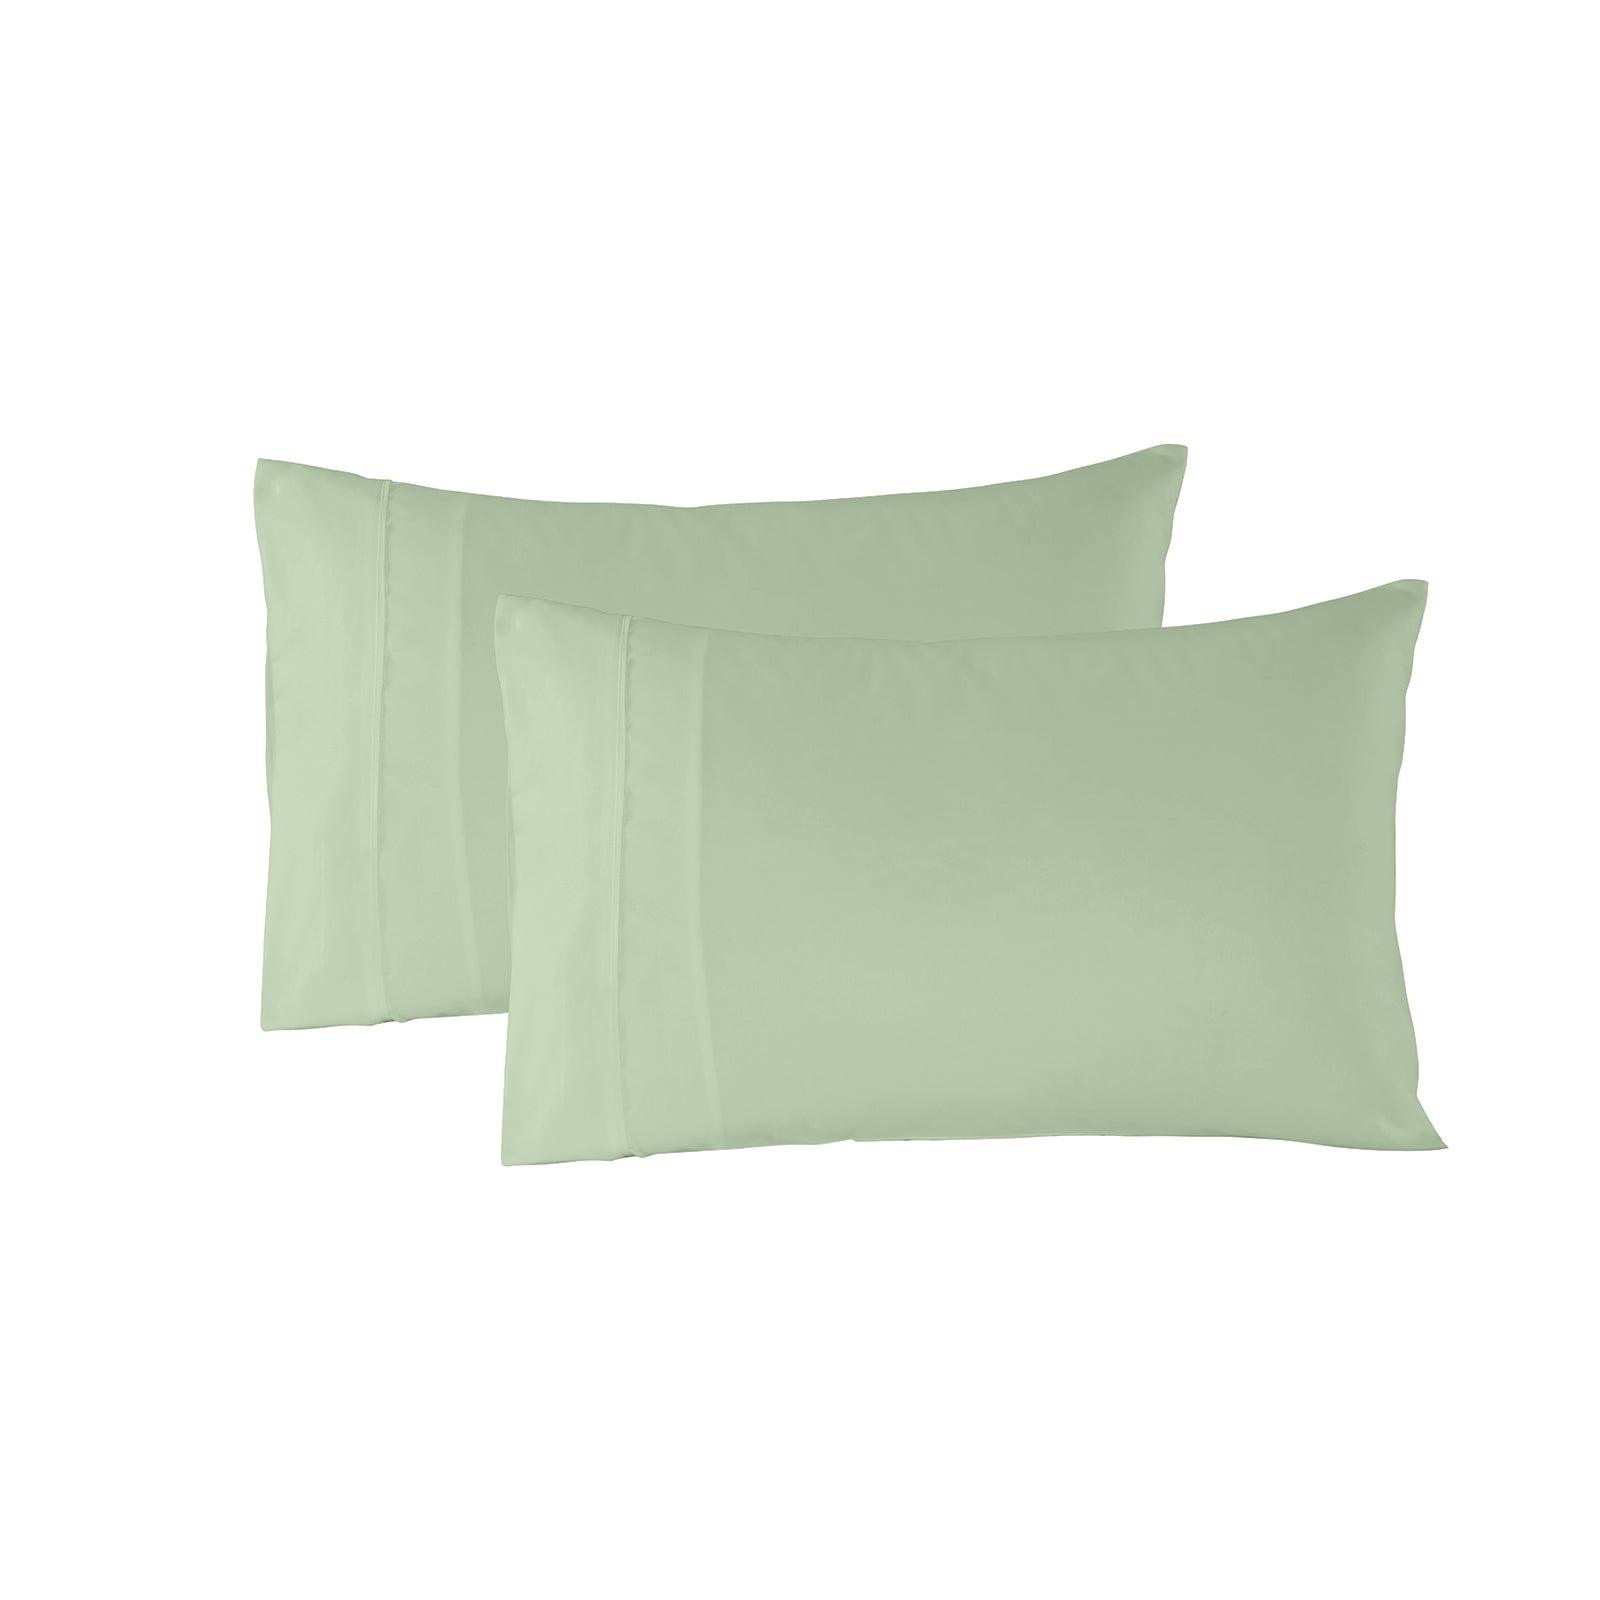 Royal Comfort 1200 Thread Count Sheet Set 4 Piece Ultra Soft Satin Weave Finish - Double - Sage Green